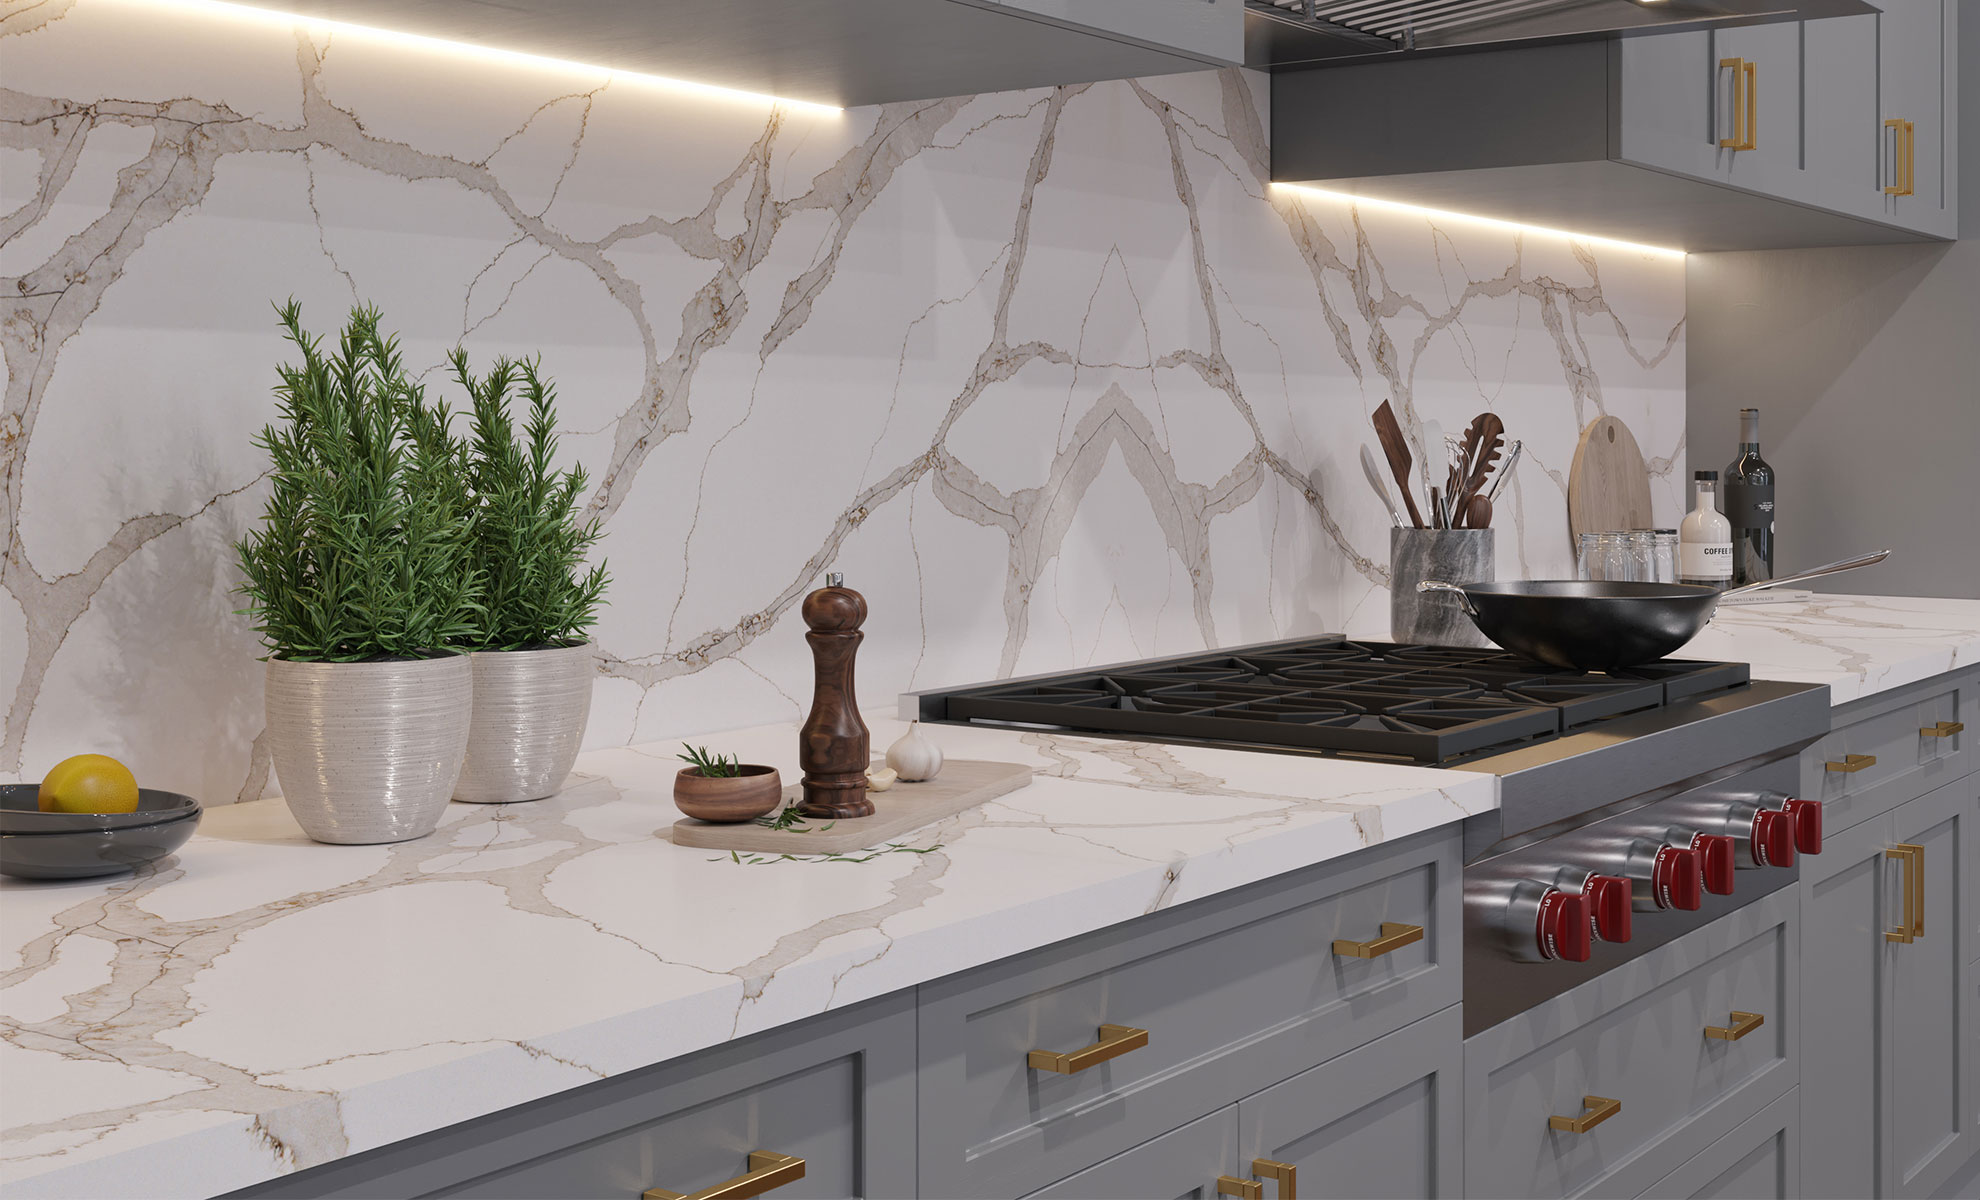 This kitchen features a gorgeous countertop and backsplash. There are grey cabinets with gold hardware incorporated into the design. Various kitchen items, including a pan, a utensil holder, a cutting board, two herb plants and a pepper shaker, are set on the counter.